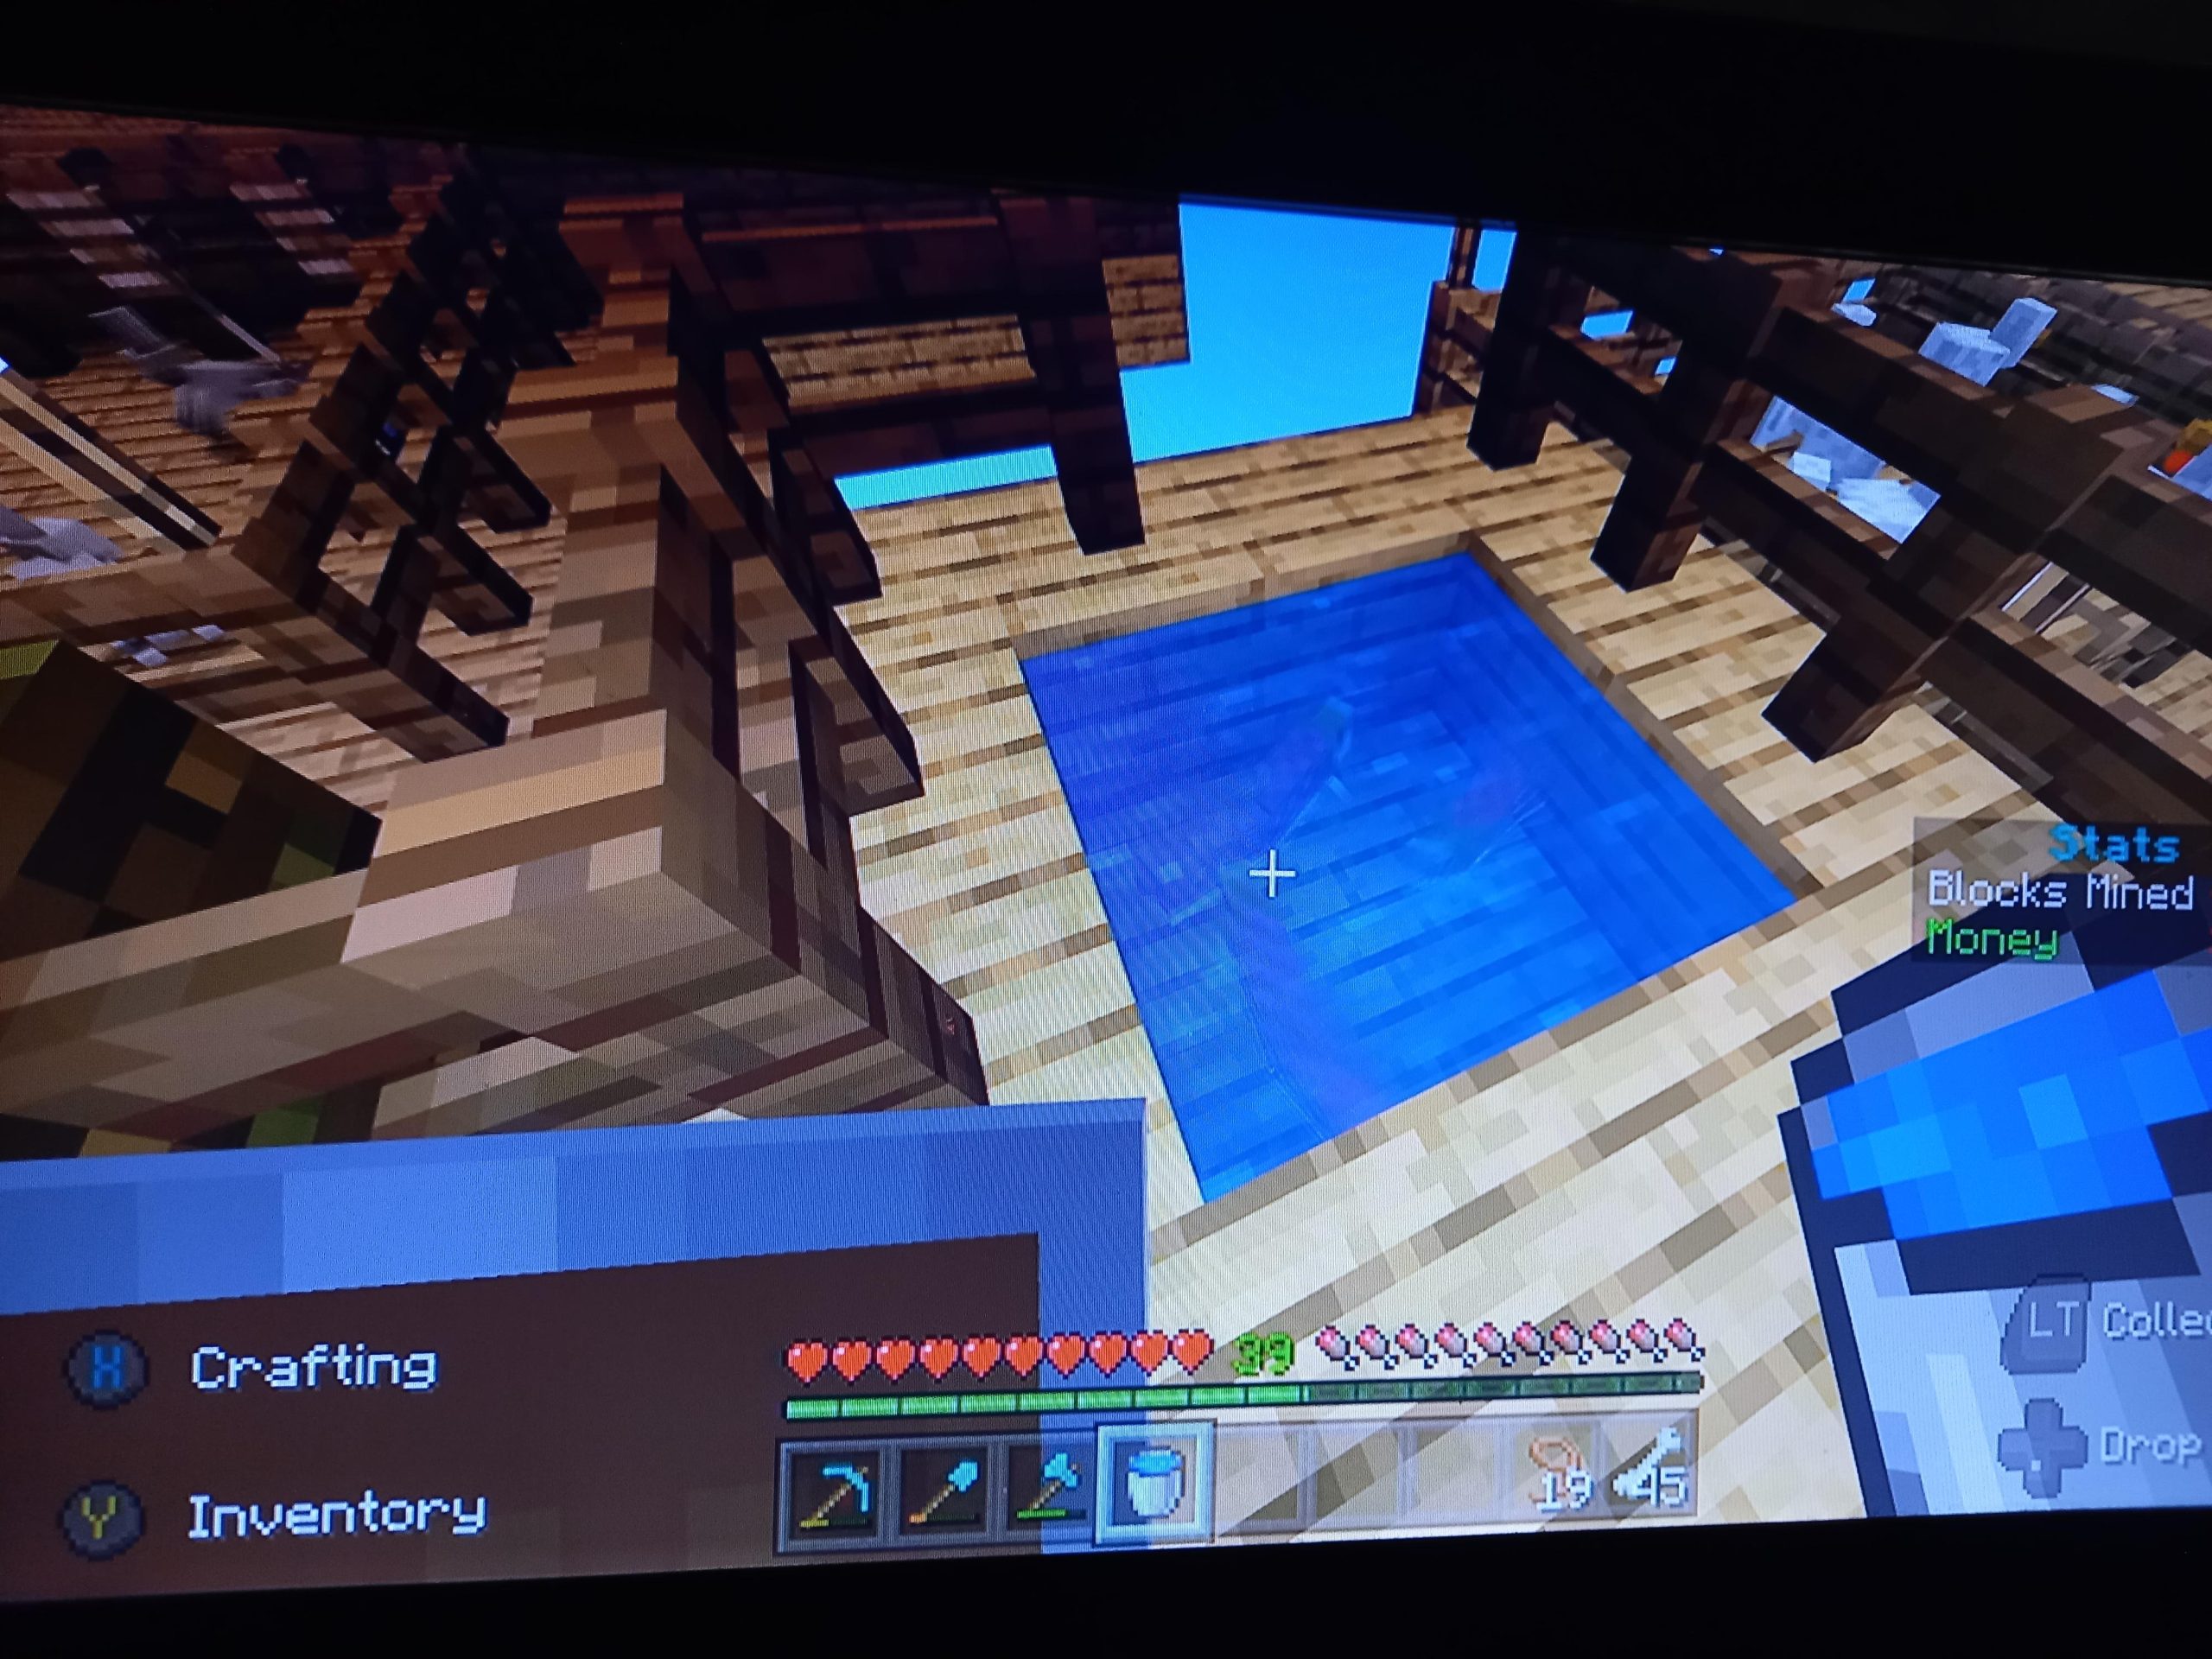 Why are tropical fish not spawning in Minecraft